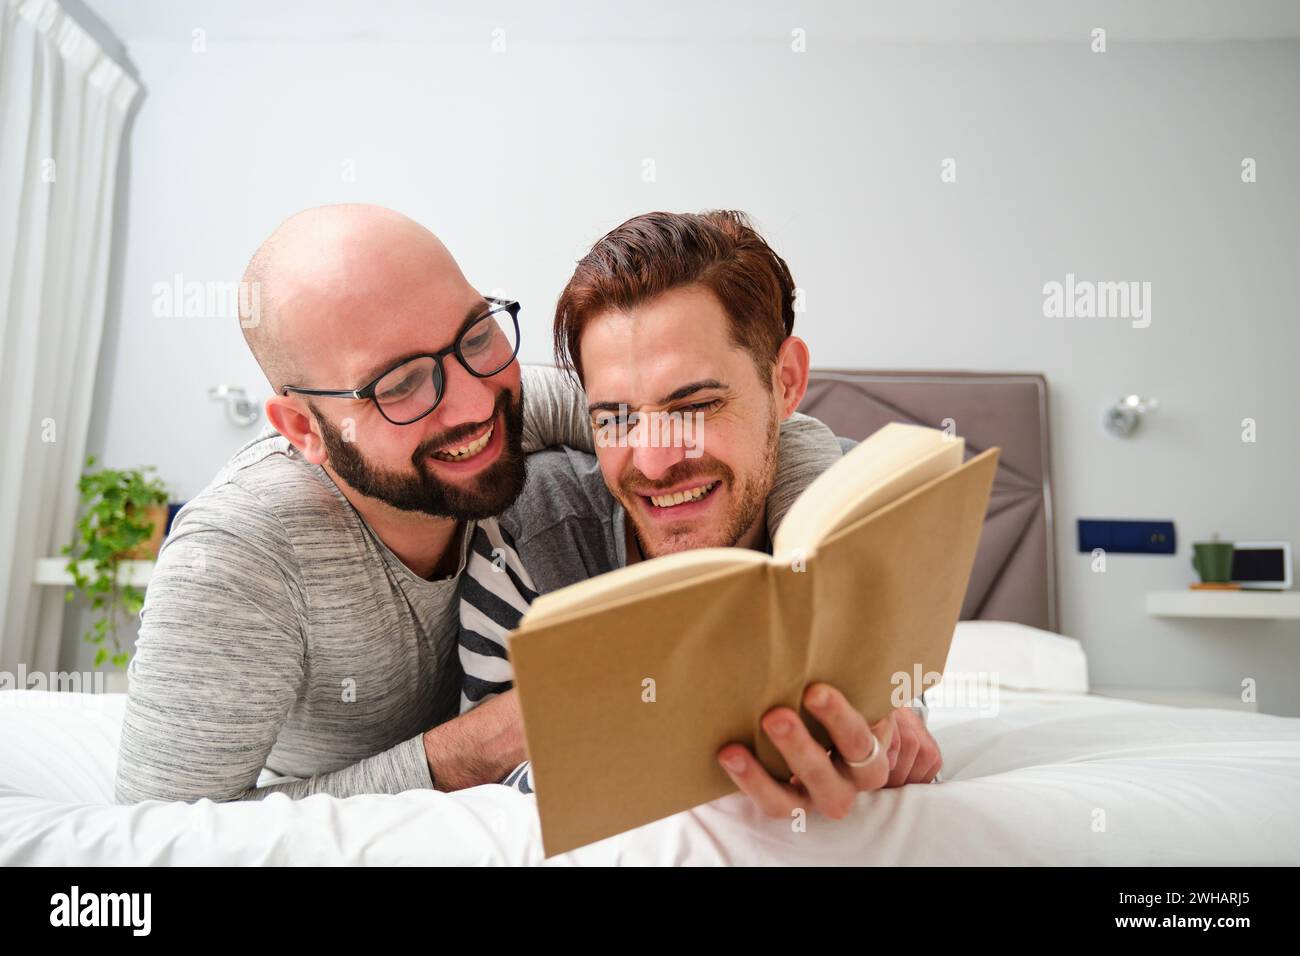 Homosexual couple read a book, hug and laugh together in bed. Stock Photo